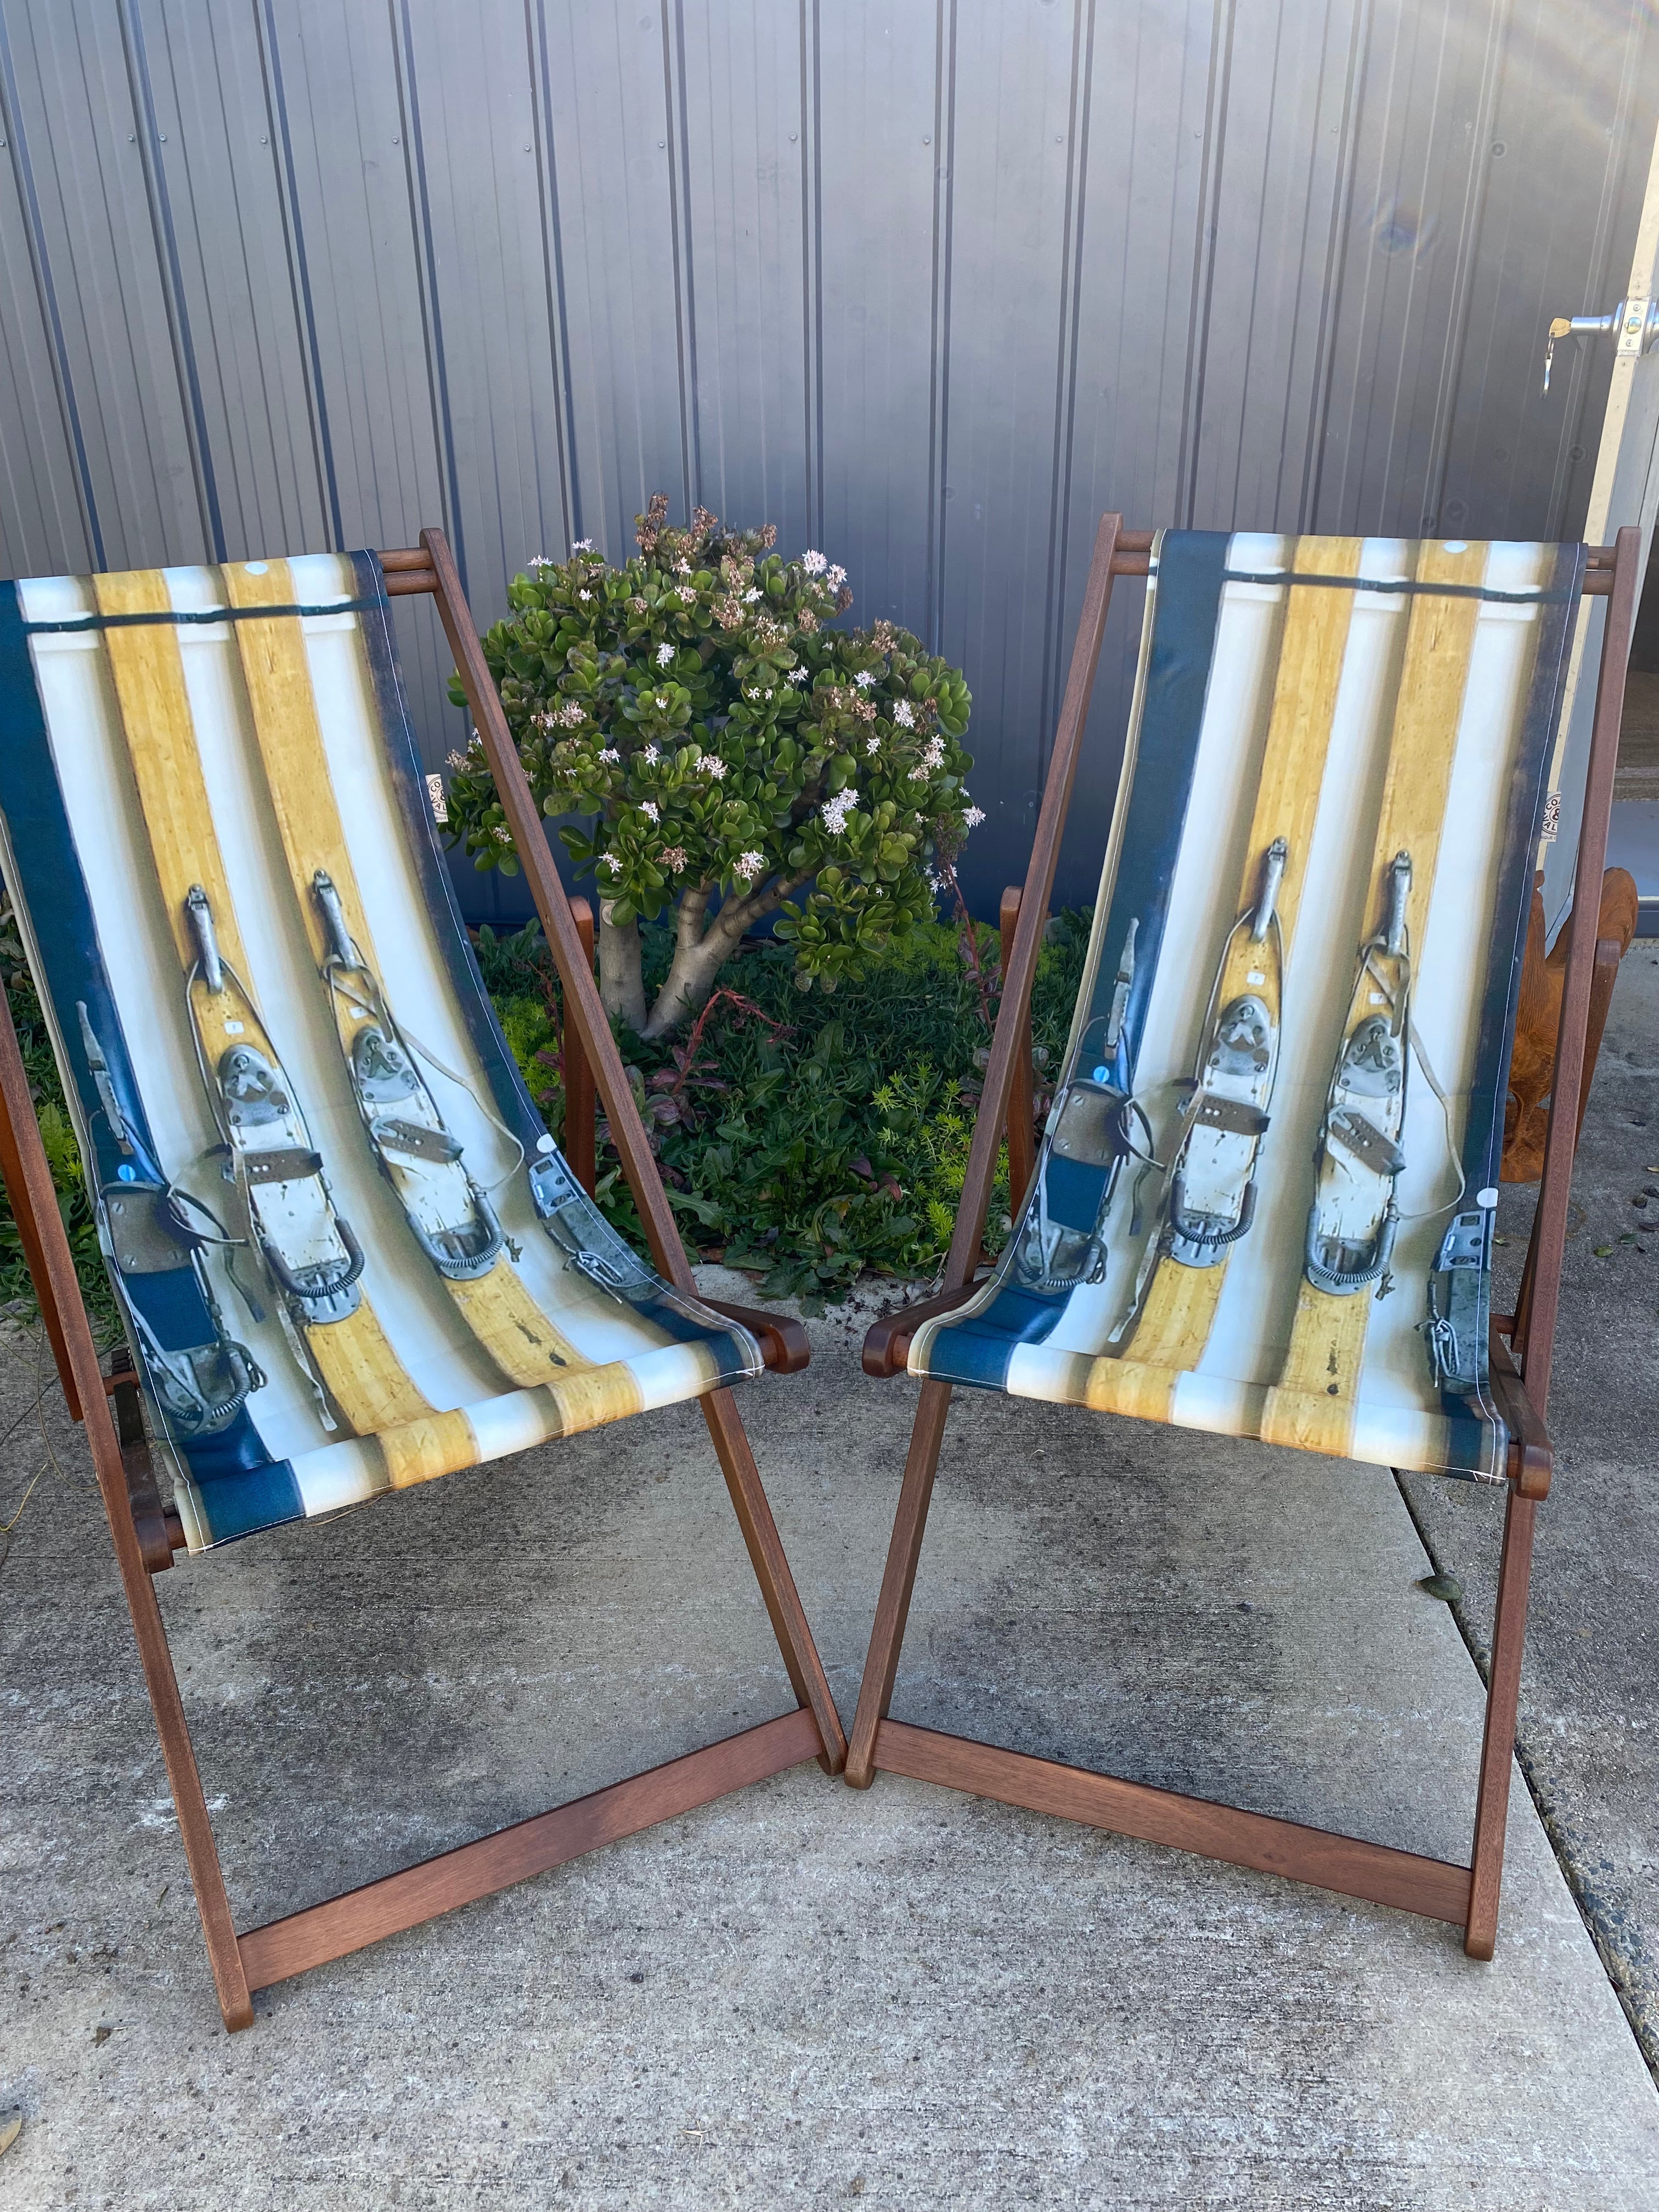 Pair of Coast & Valley Deck Chairs: Vintage Ski design showing 2 pairs of vintage wooden skis with bindings. 2 chairs facing forward. On a concrete floor against a blue steel shed and door with garden bed in the background